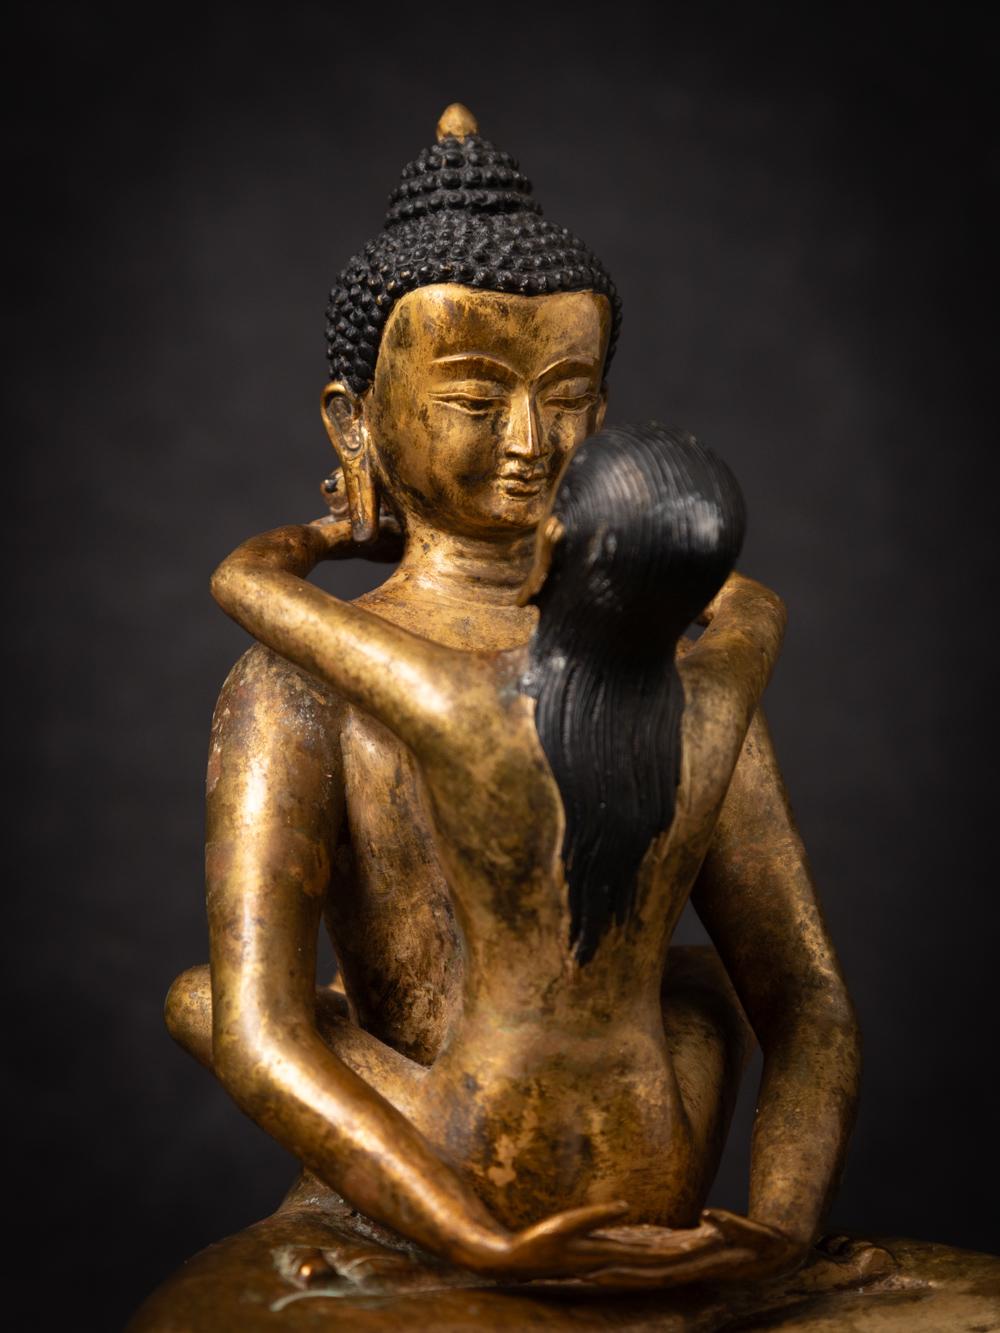 The old bronze Samantabhadra statue from Nepal is a captivating and spiritually meaningful artifact. Crafted from bronze and adorned with fire gilding in 24-karat gold, this statue stands at 21.6 cm in height and measures 16.7 cm in width and 15.3